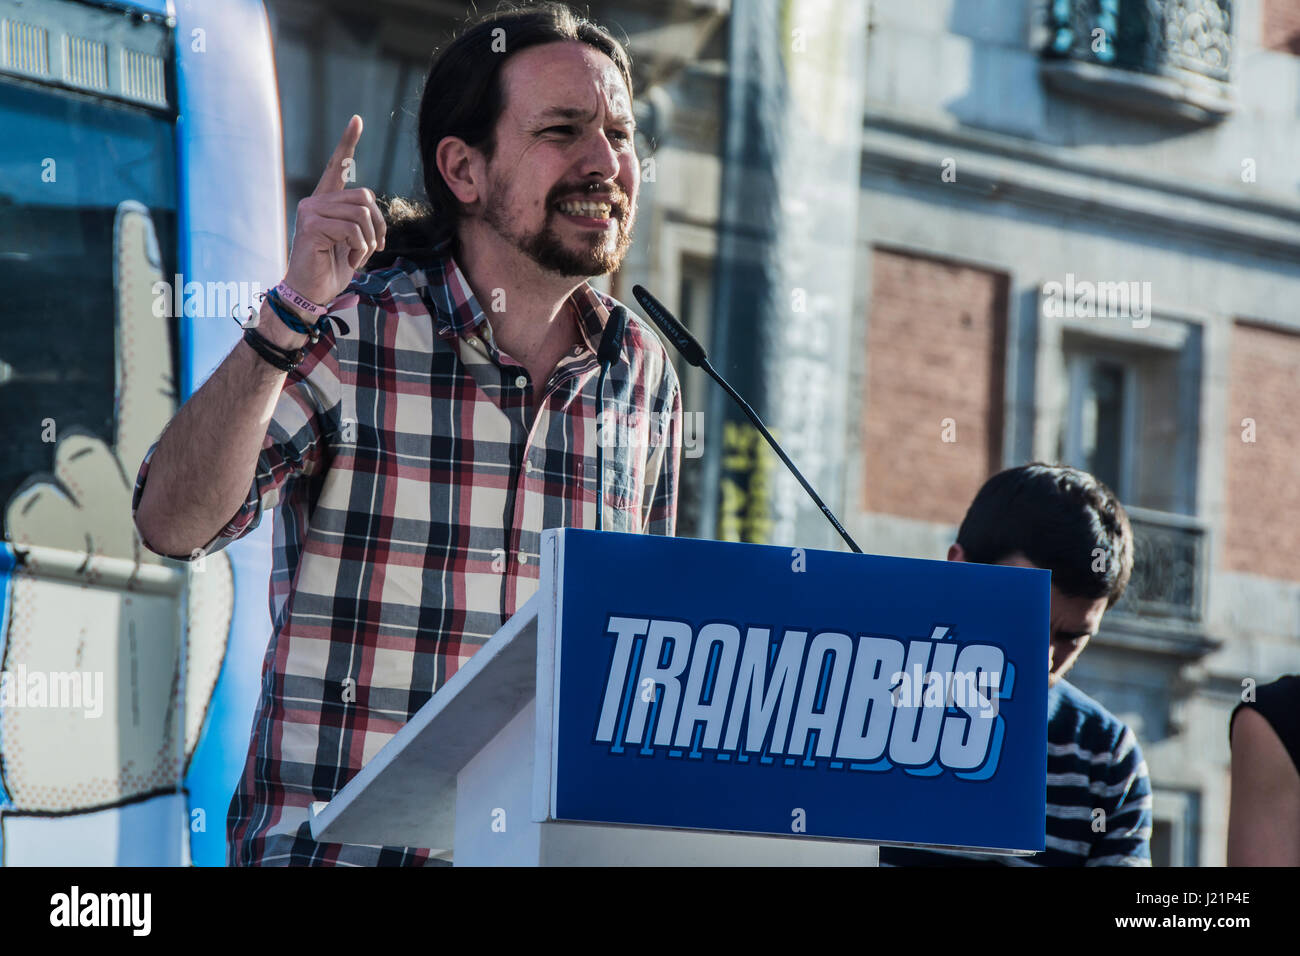 Madrid, Spain. 23rd April, 2017. meeting of podemos with pablo iglesias with el tramabus a blue bus that circulate around madrid city and in the bus its draw a different politic characters with charges of corruption Credit: Alberto Sibaja Ramírez/Alamy Live News Stock Photo